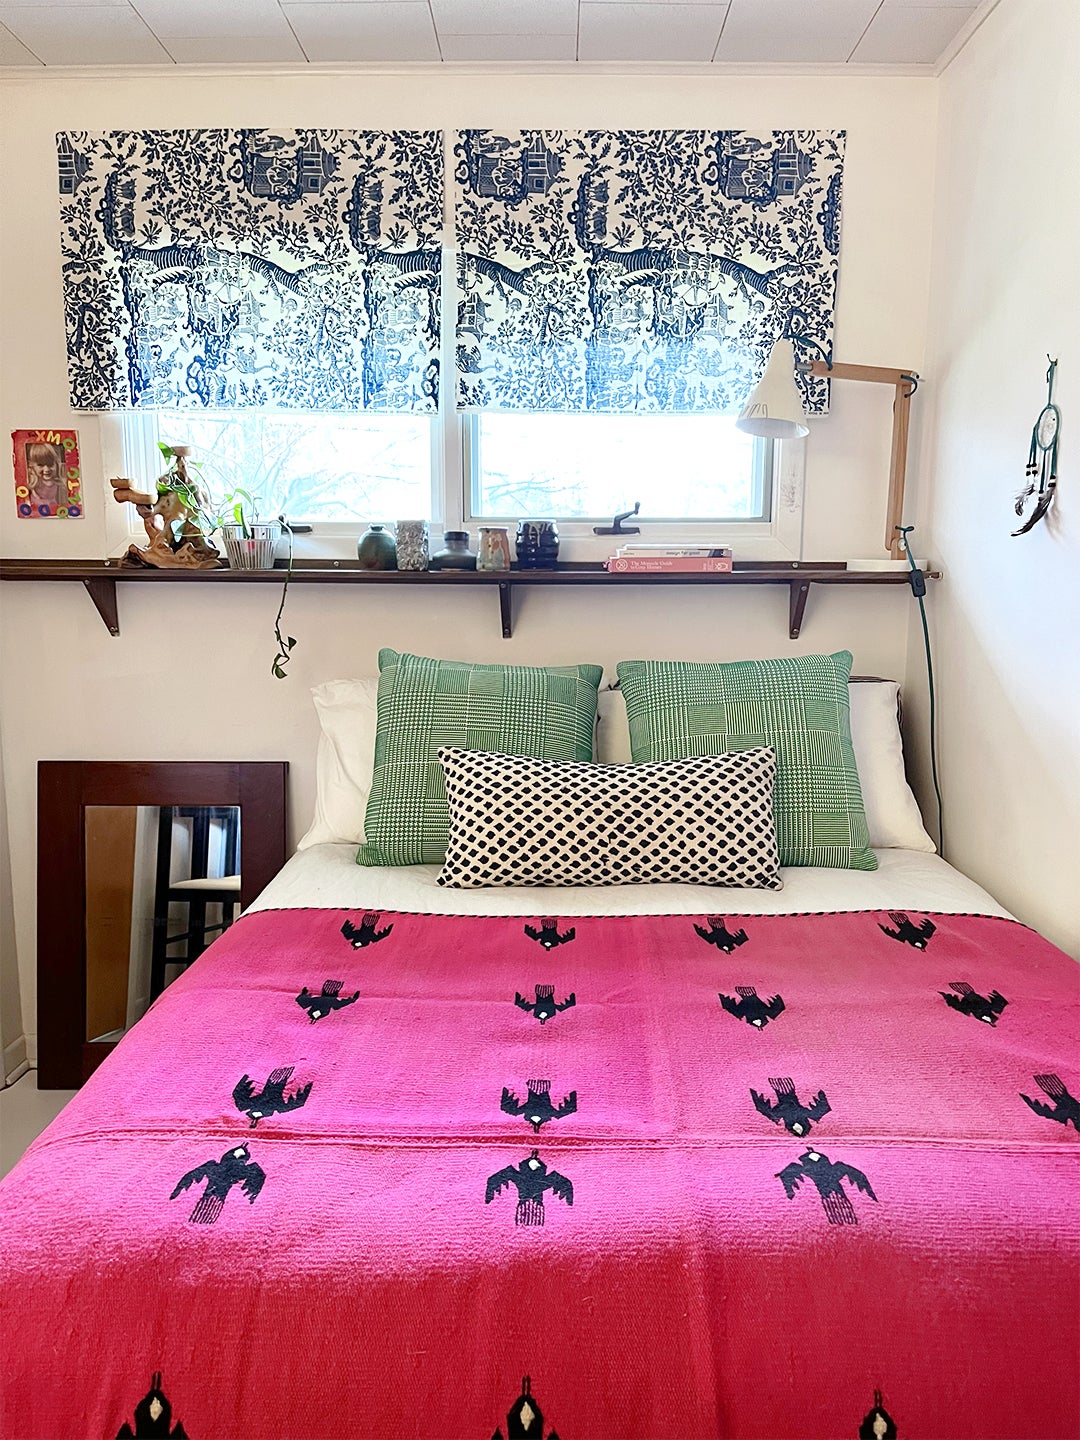 small bedroom with hot pink blanket and mix of patterns